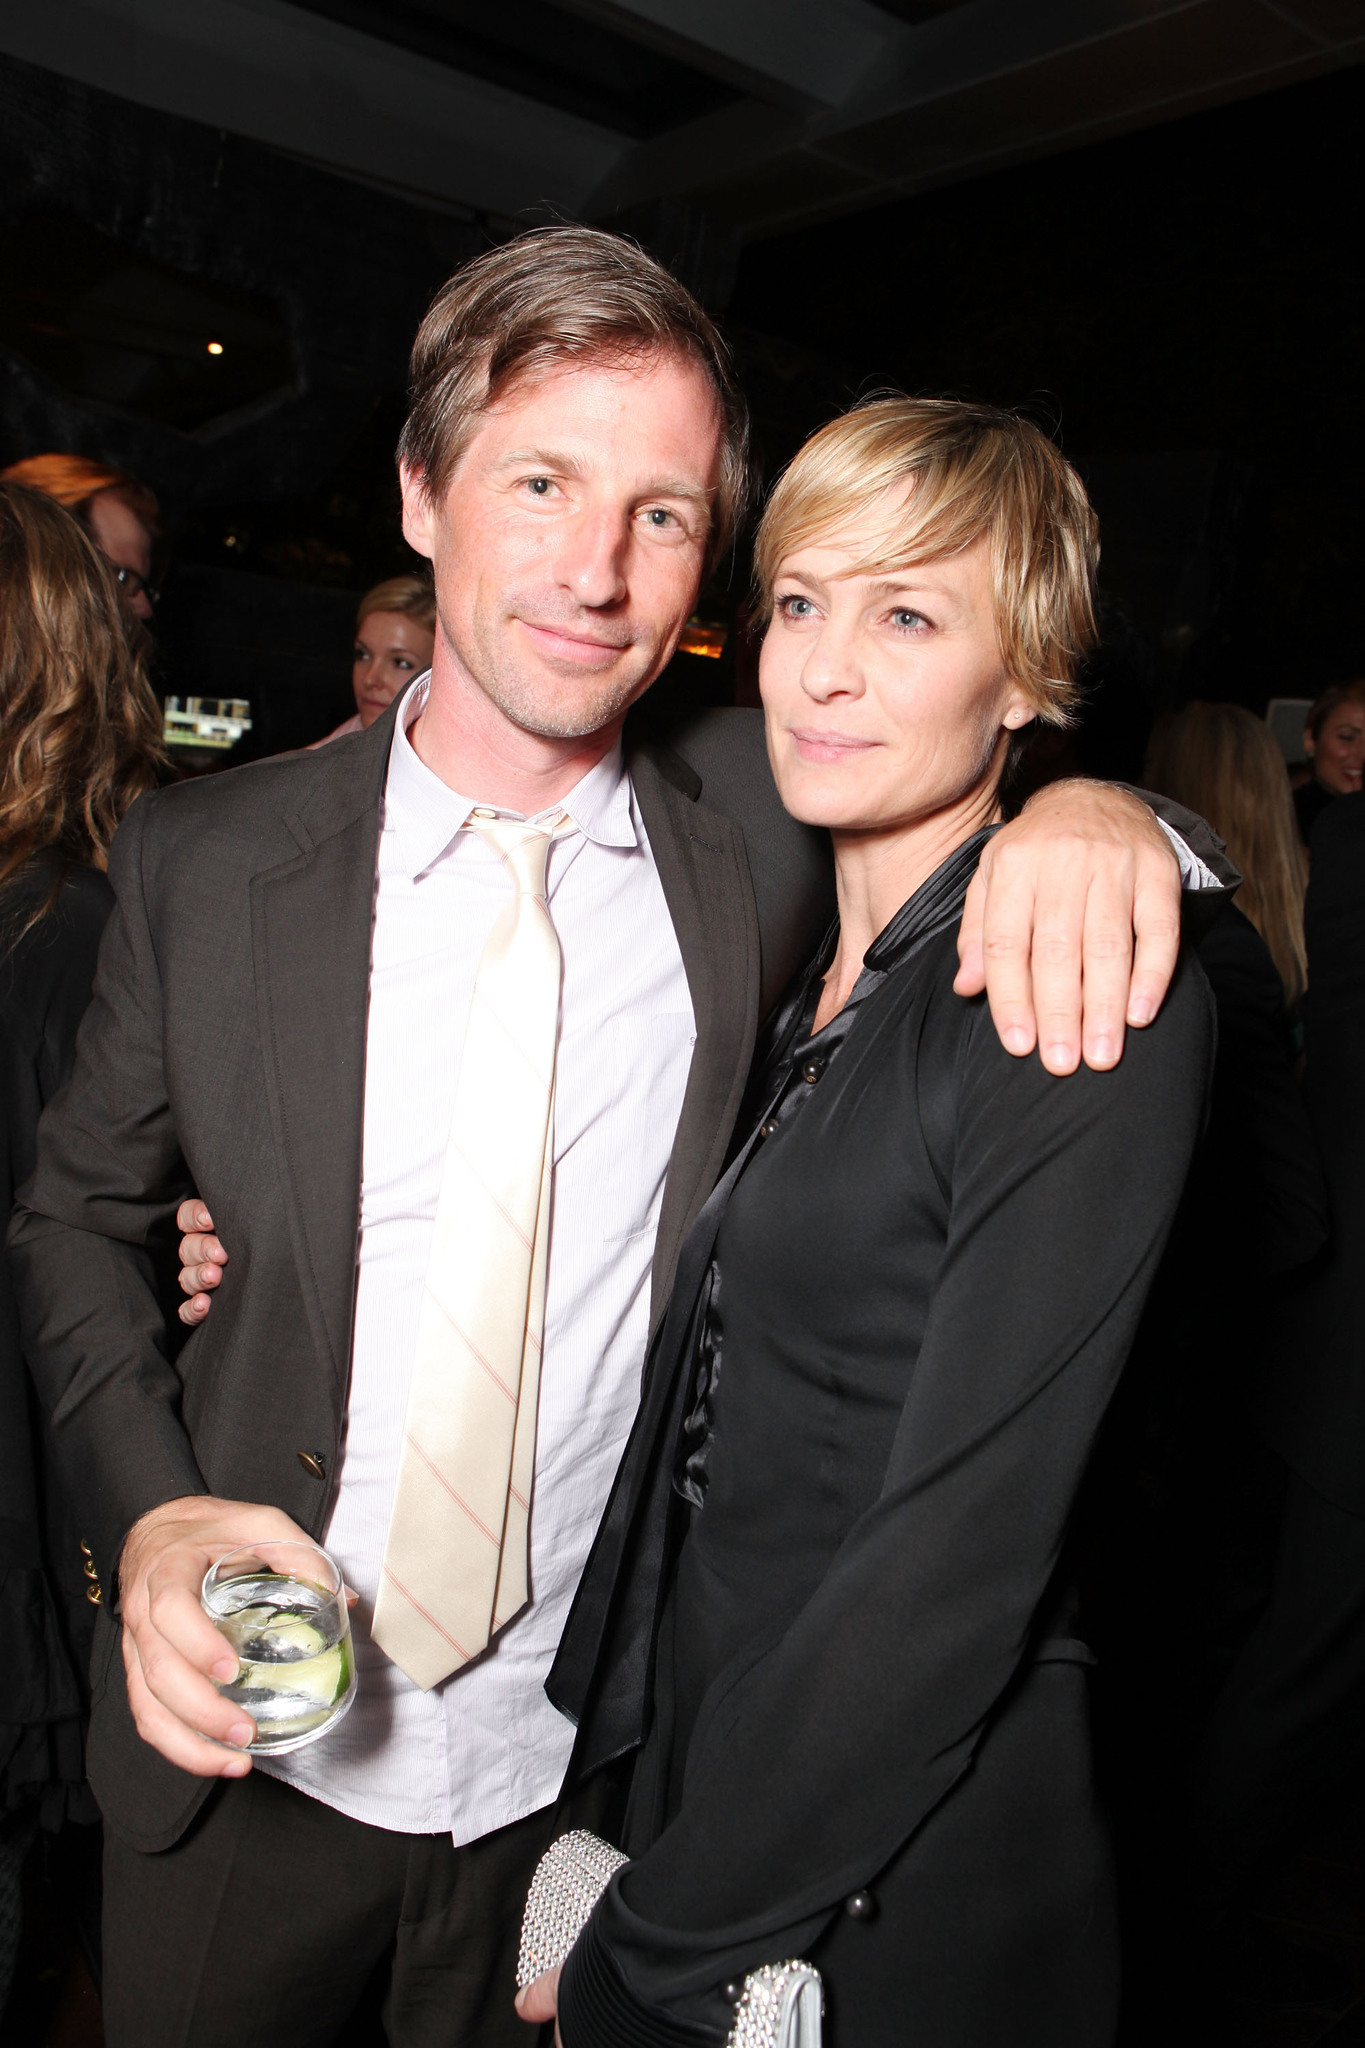 Robin Wright and Spike Jonze at event of Zmogus, pakeites viska (2011)